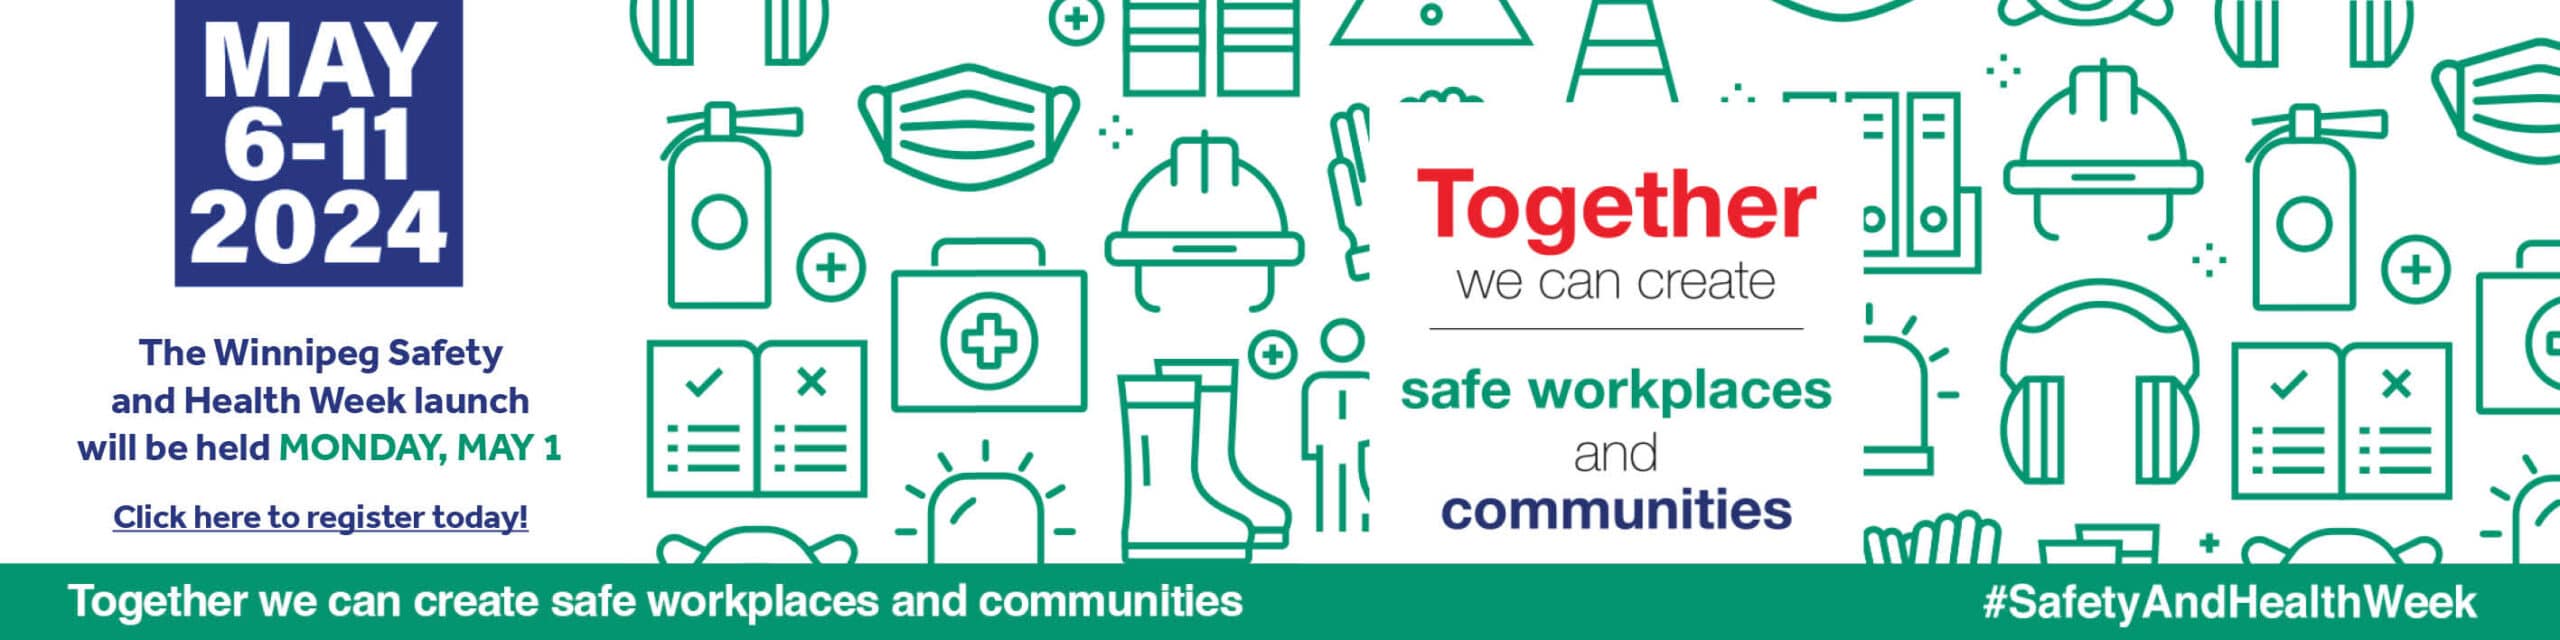 May 6-11 2024 The Winnipeg Safety and Health Week launch will be held Monday, May 1. Click here to register today! Together we can create safe workplaces and communities. hashtag Safety and Health Week.